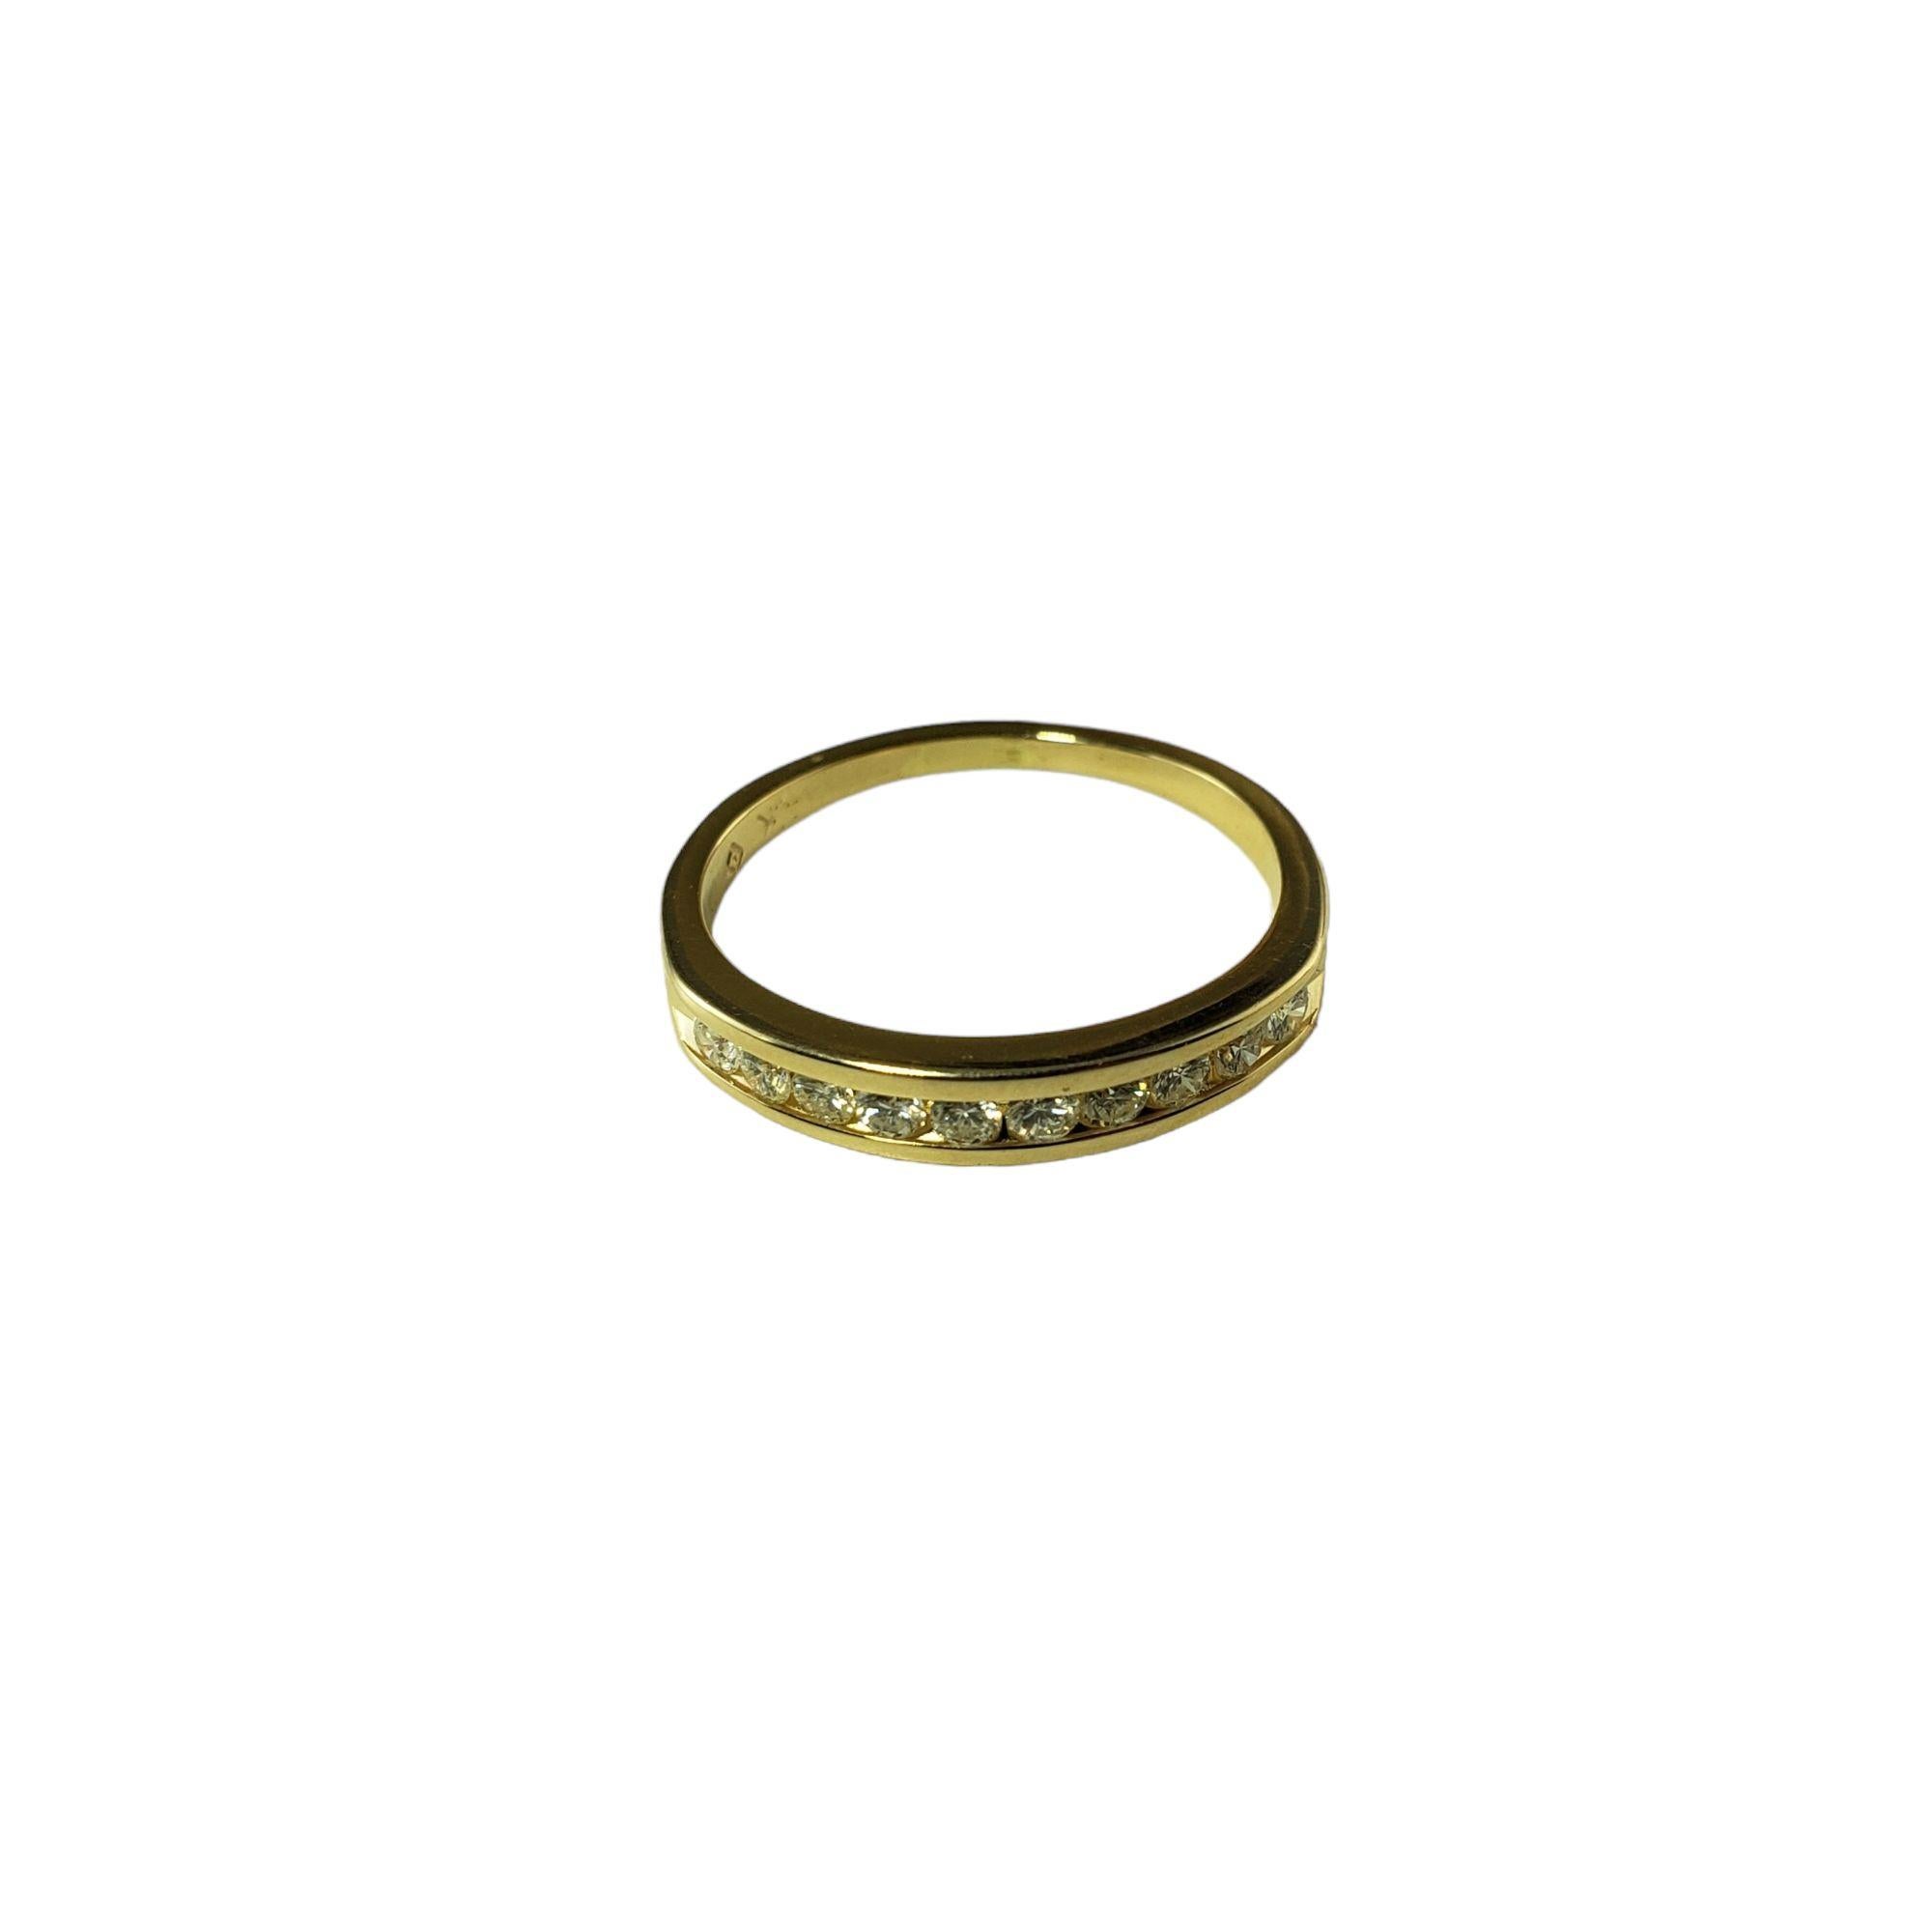 Vintage 14 Karat Yellow Gold and Diamond Band Ring Size 5.5-

This sparkling band features 10 round brilliant cut diamonds set in classic 14K  yellow gold.  Width: 3 mm.  Shank: 1.5 mm.

Approximate total diamond weight:  .30 ct.

Diamond color: 